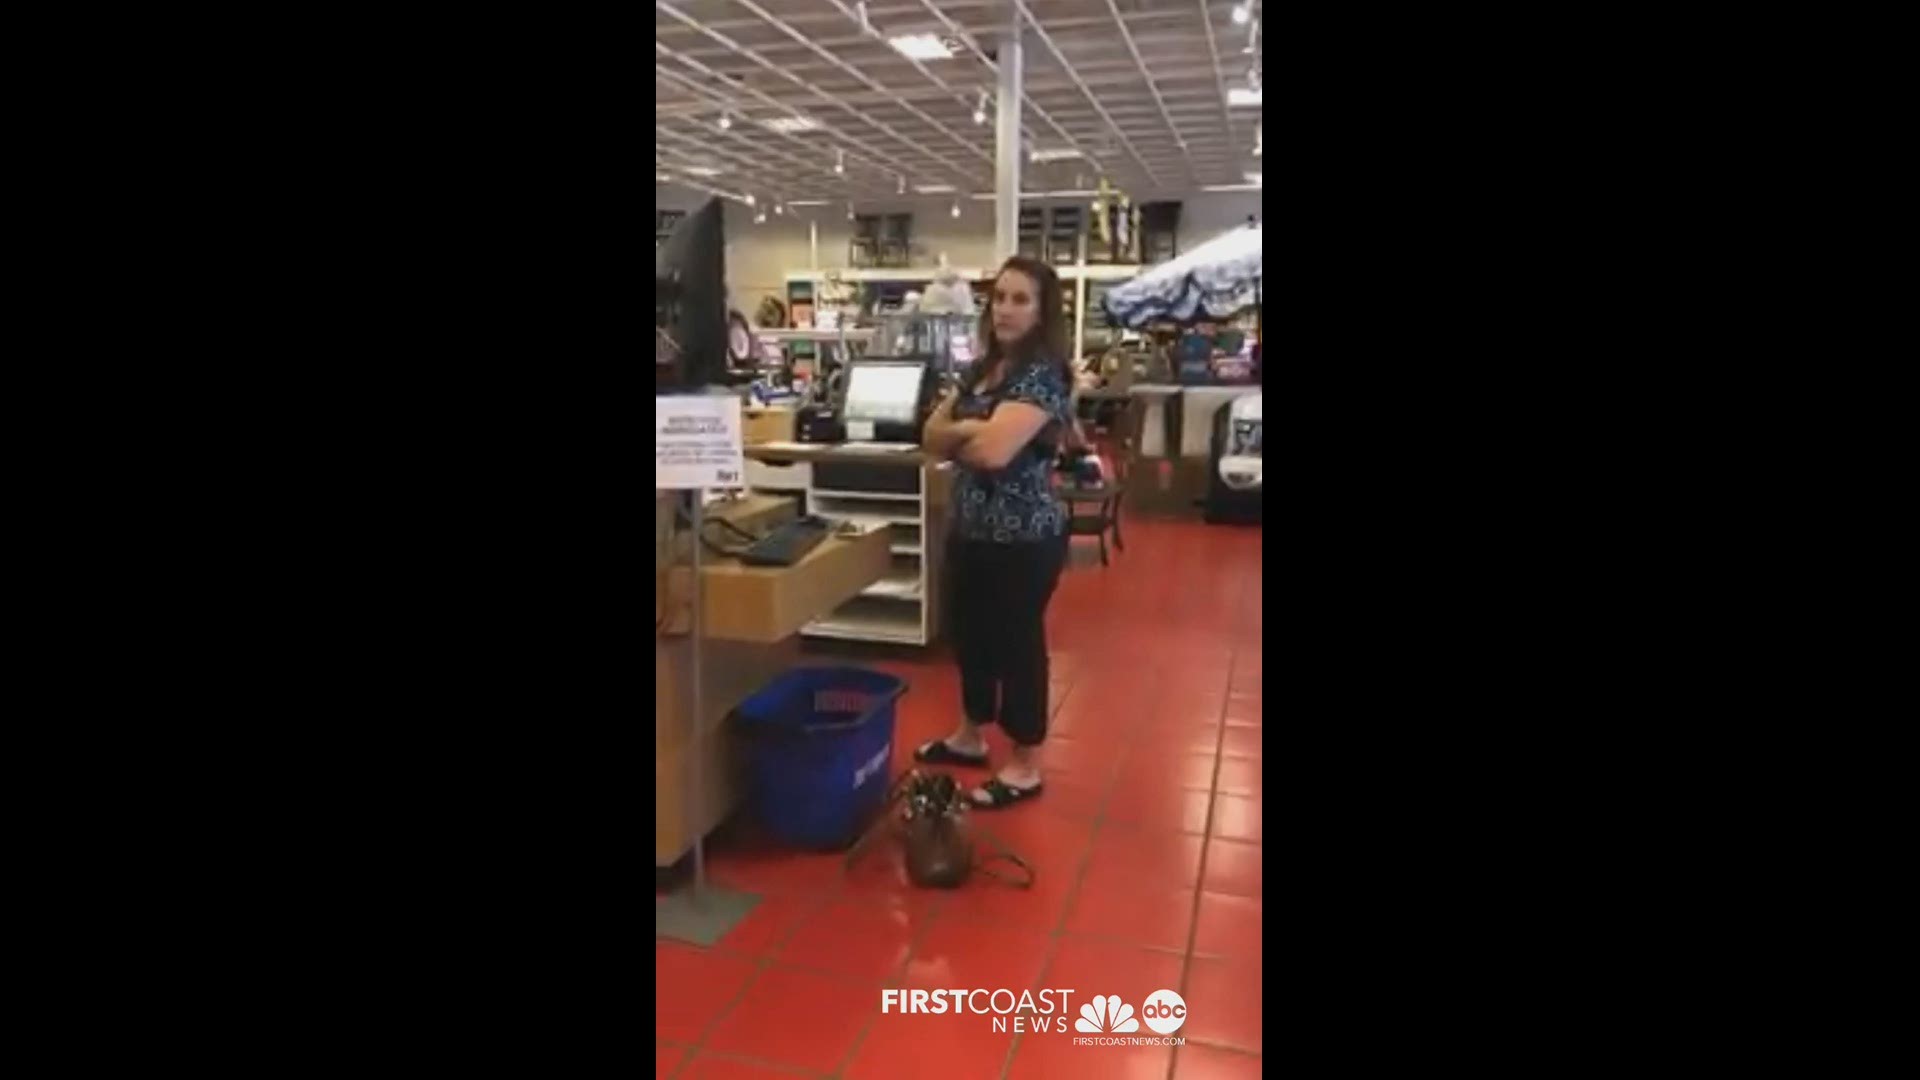 Heather Sprague was in Jacksonville's Town Center when she began recording an irate customer who was having a tantrum screaming at staff. The woman coughed on her.